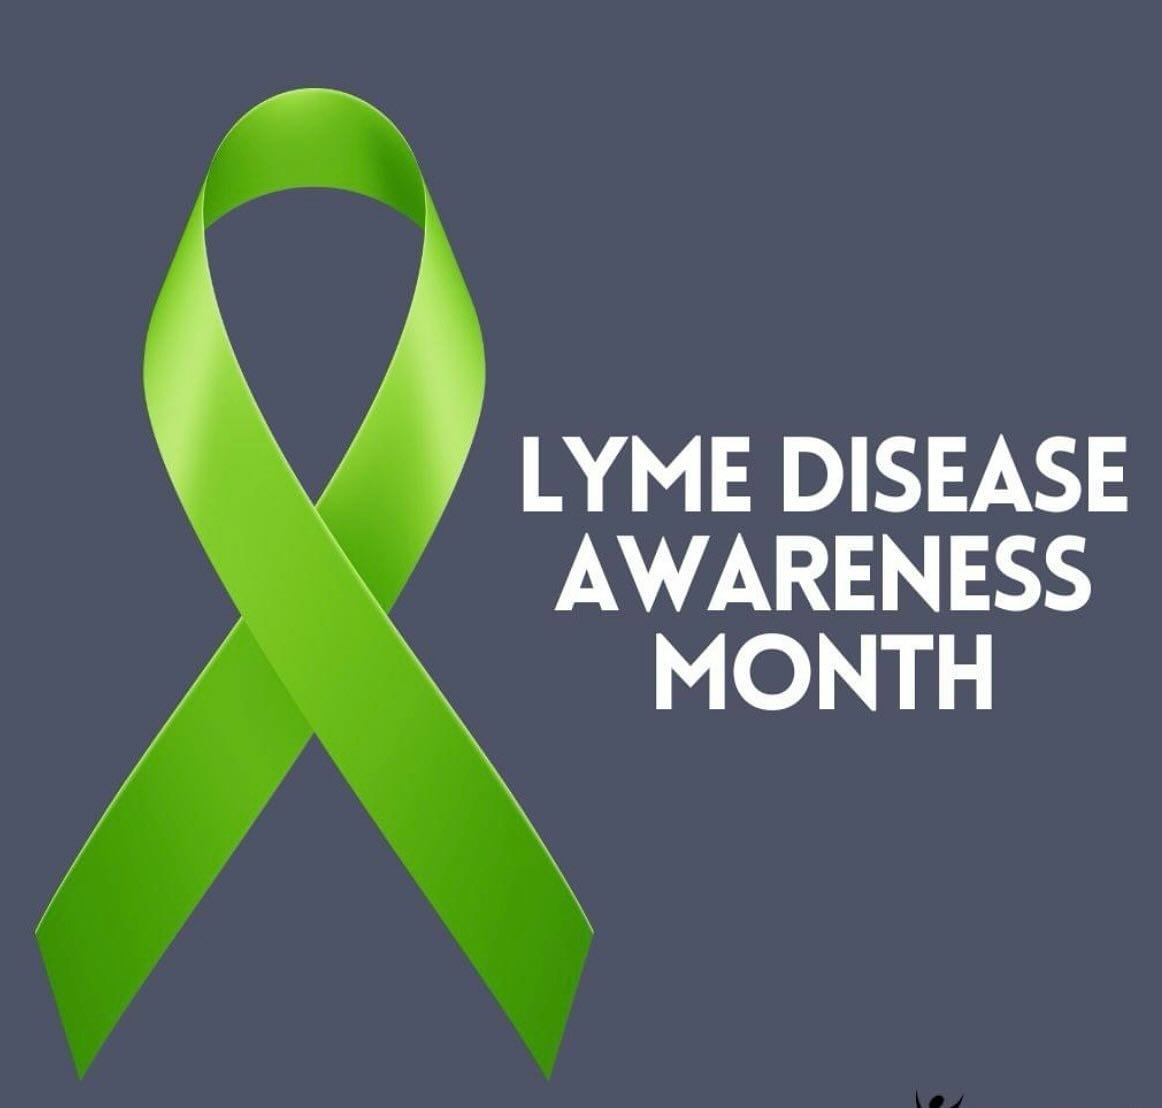 Month of May is Lyme Disease Awareness Month. The world knows very little about this debilitating disease. I&rsquo;m letting my family &amp; friends know to be careful whenever you step outside, hiking, camping or just simply hanging out at the park,